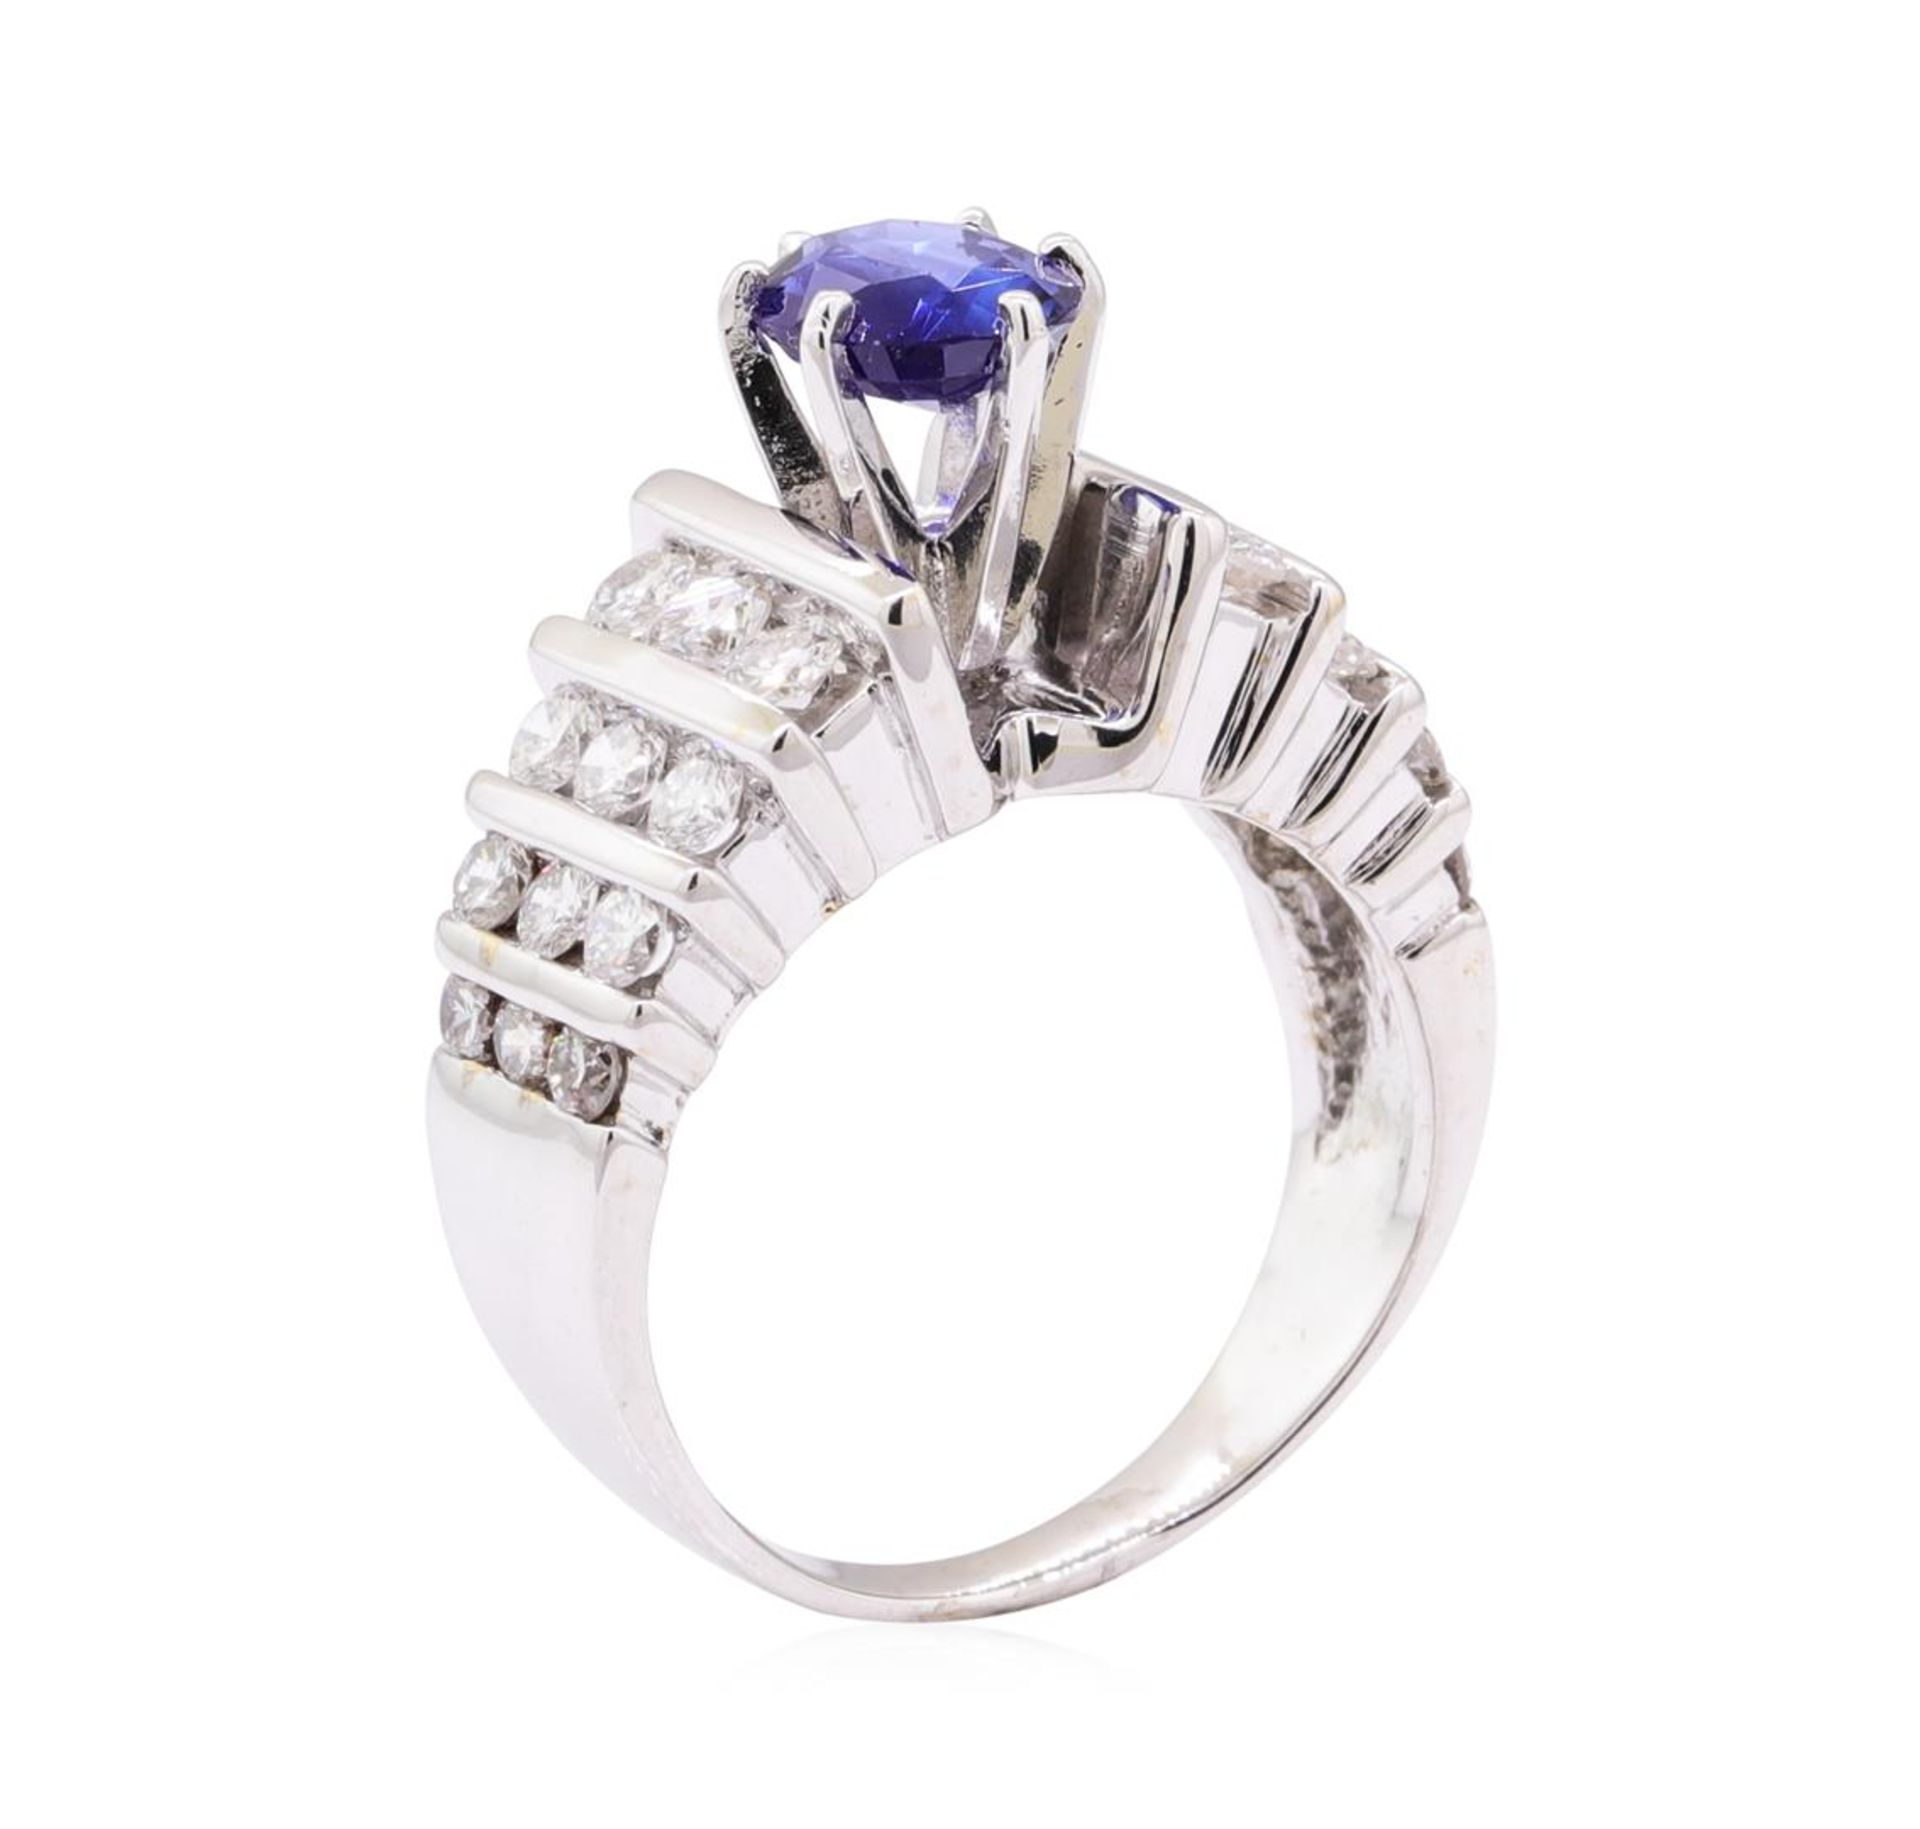 2.56 ctw Blue Sapphire And Diamond Ring - 14KT White Gold - Image 4 of 5